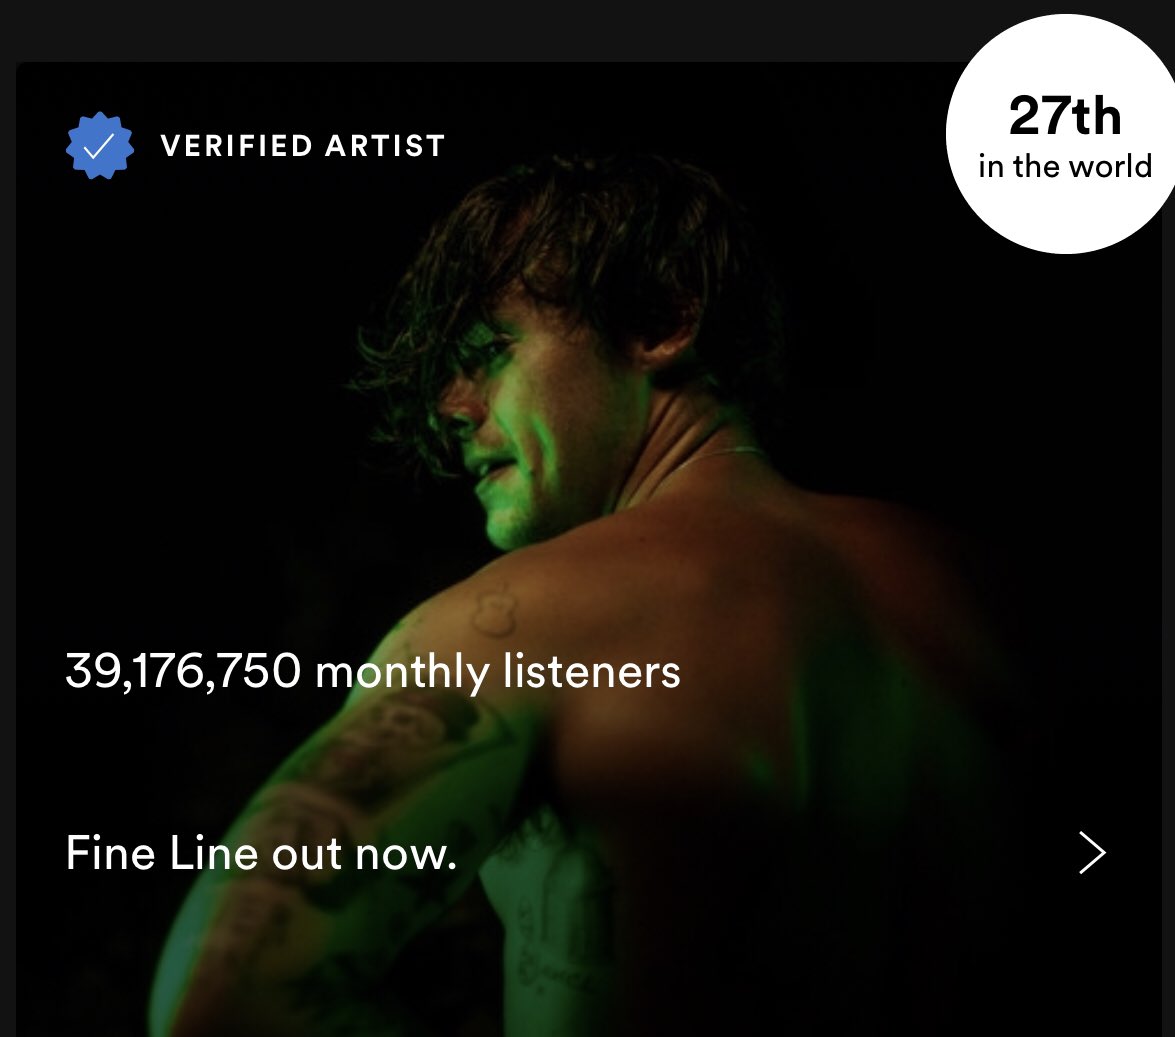 -Harry reached over 39M monthly listeners on spotify for the first time, he still is at #27 most listened artist right now.- Harry is #5 on this week artist 100.-"Adore You" rises to #11 on the Billboard 100 chart (30 weeks).